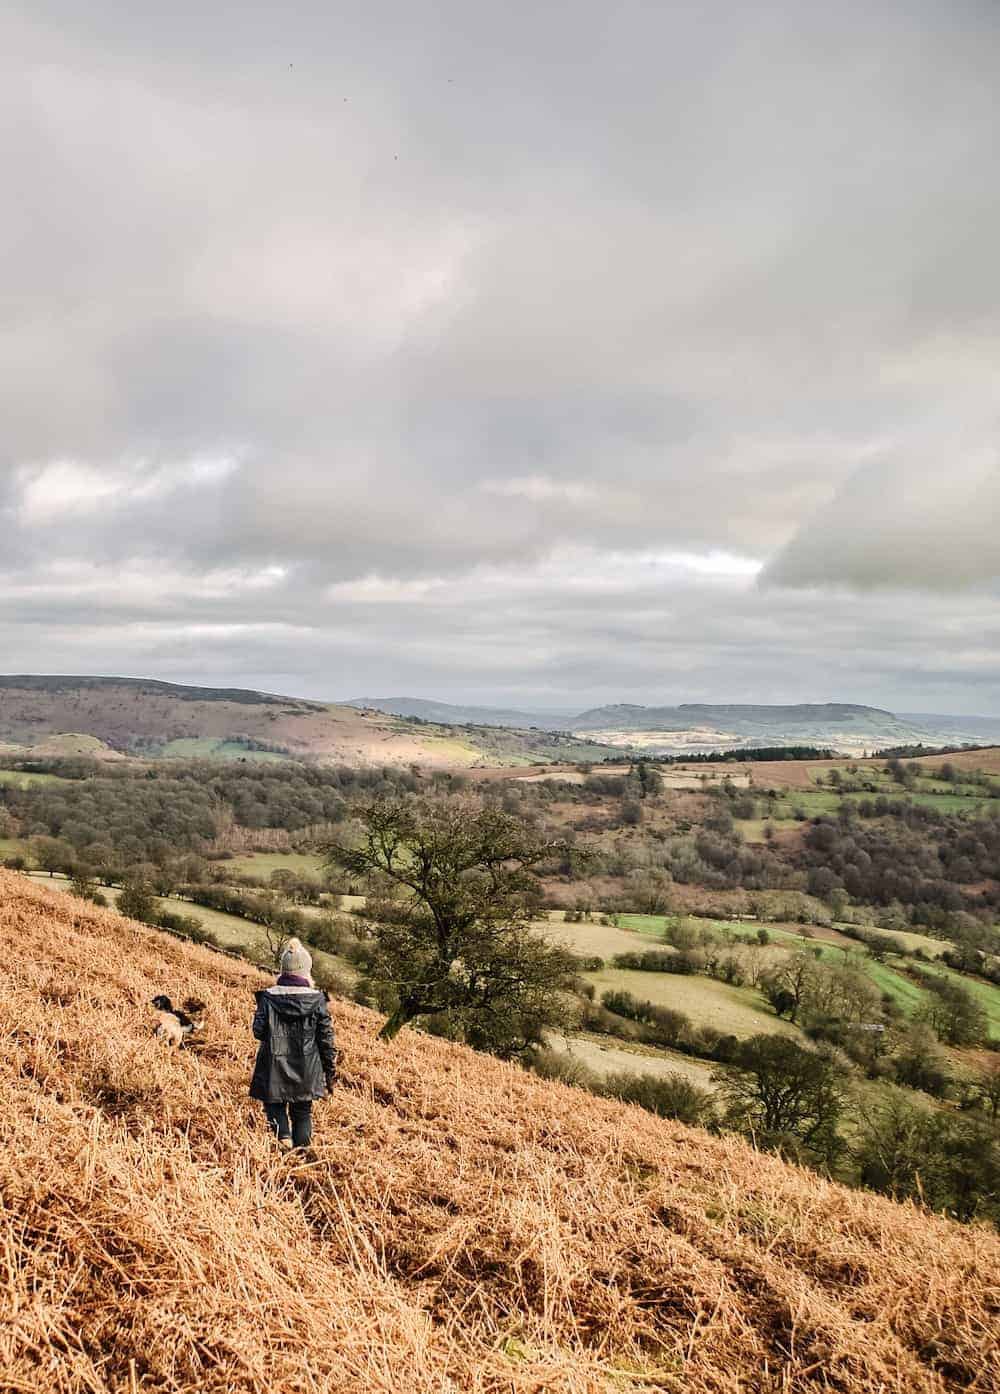 dog walking in the brecon beacons in wales near the black mountains between Abergavenny and Llanthony. Click through to see more images from our stay as well as inside shots of beautiful modern rustic Patrishow Farm where we stayed